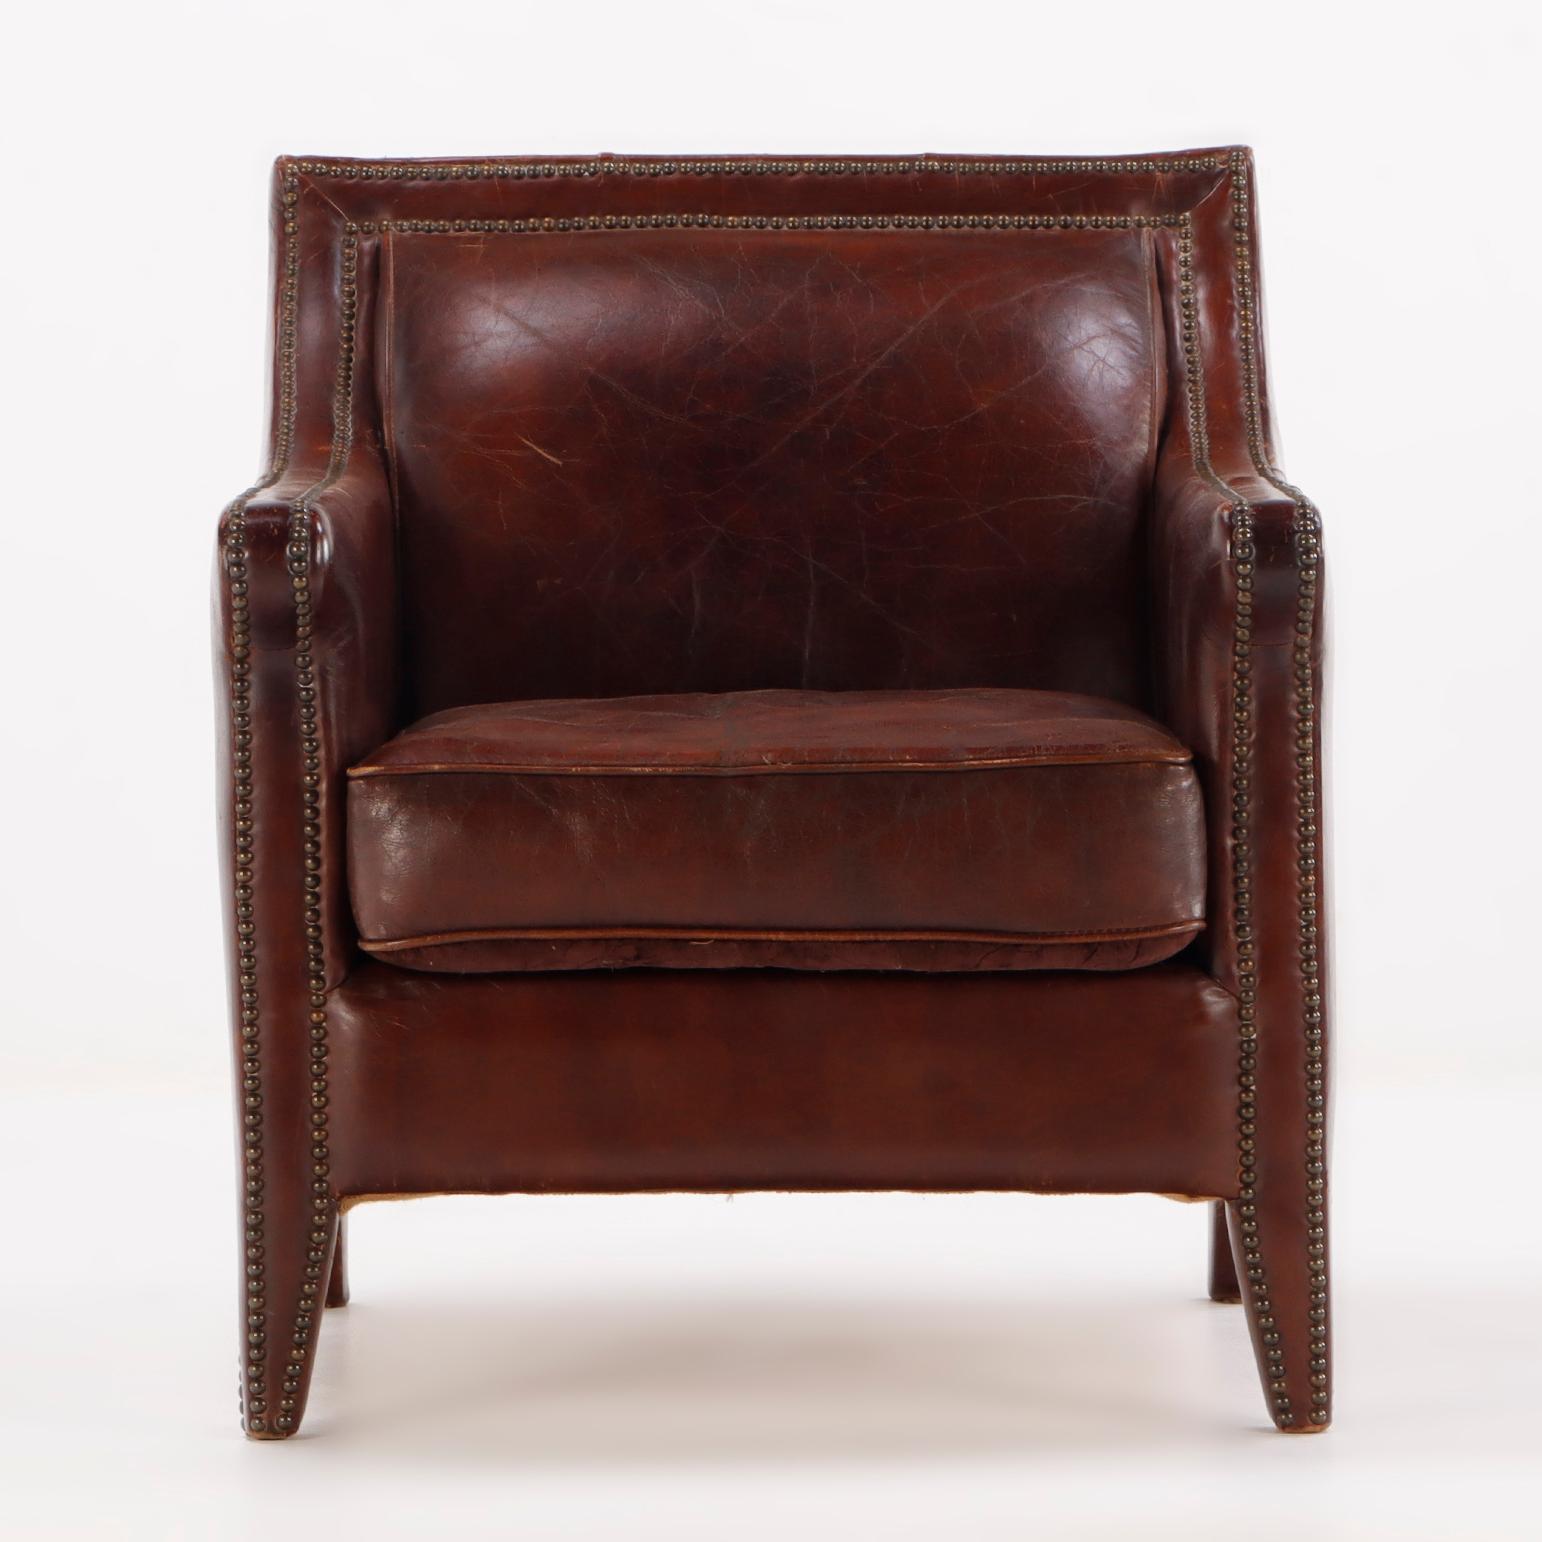 Hard to find pair of French leather club chairs C 1970 having brass tack details. These chairs are not only a great design but also large in scale.